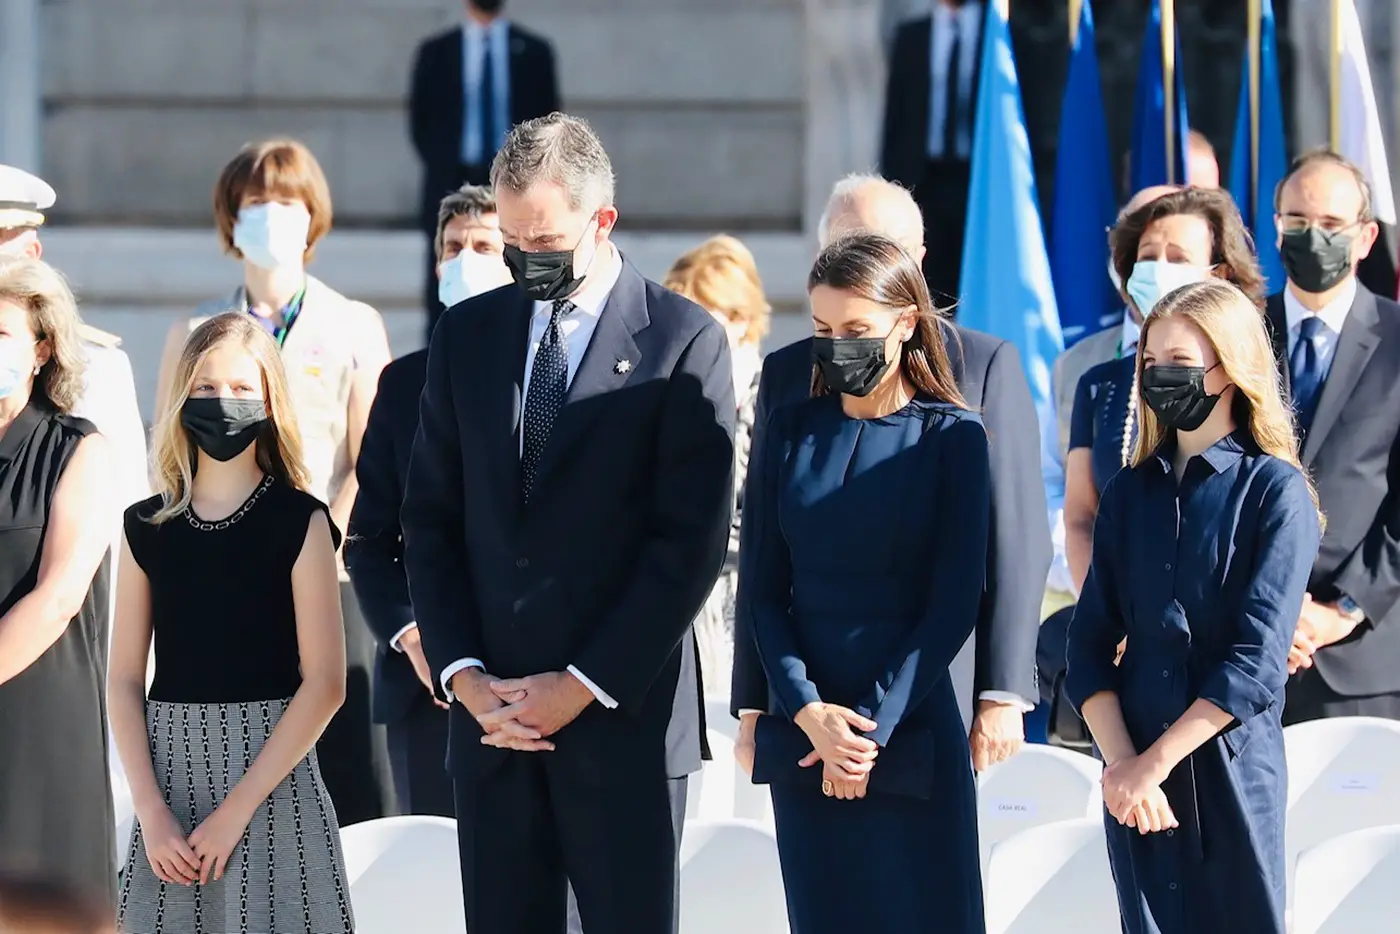 Spanish Royals at the Solemn act of tribute to the victims of Covid-19 and recognition of society